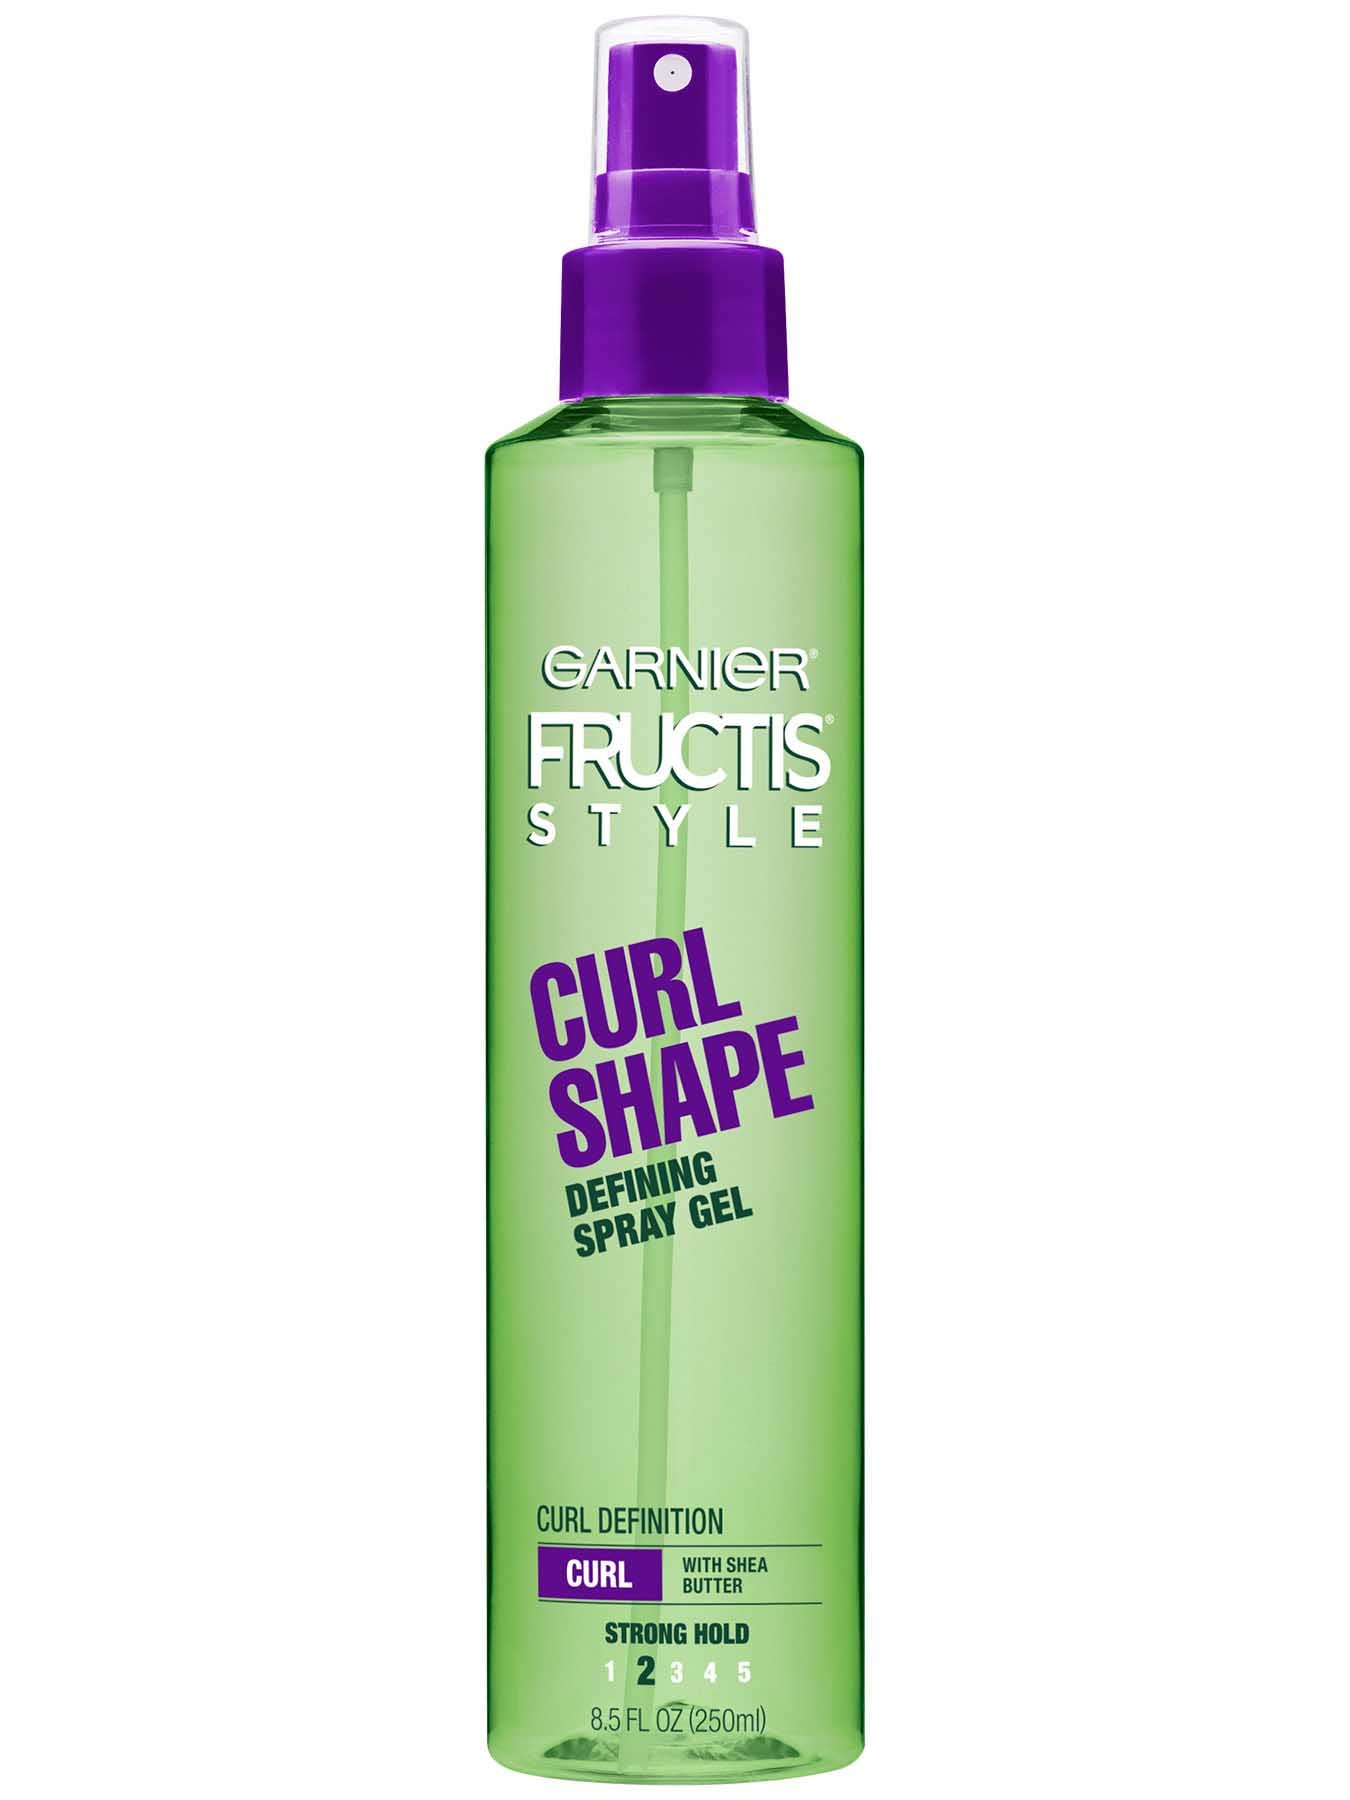 Front view of Curl Shape Defining Spray Gel.